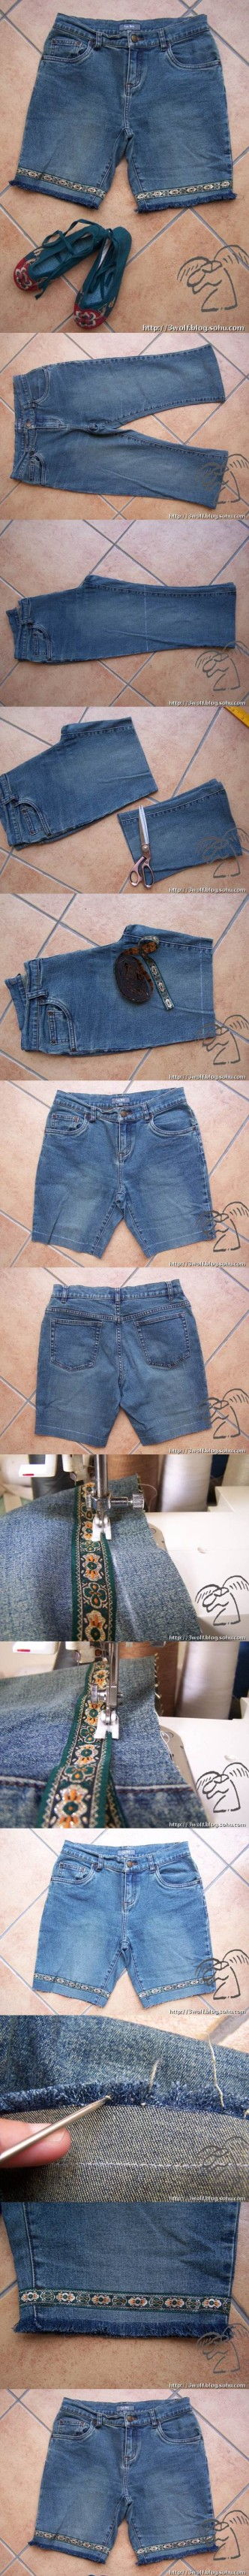 DIY Stylish Shorts from Old Jeans